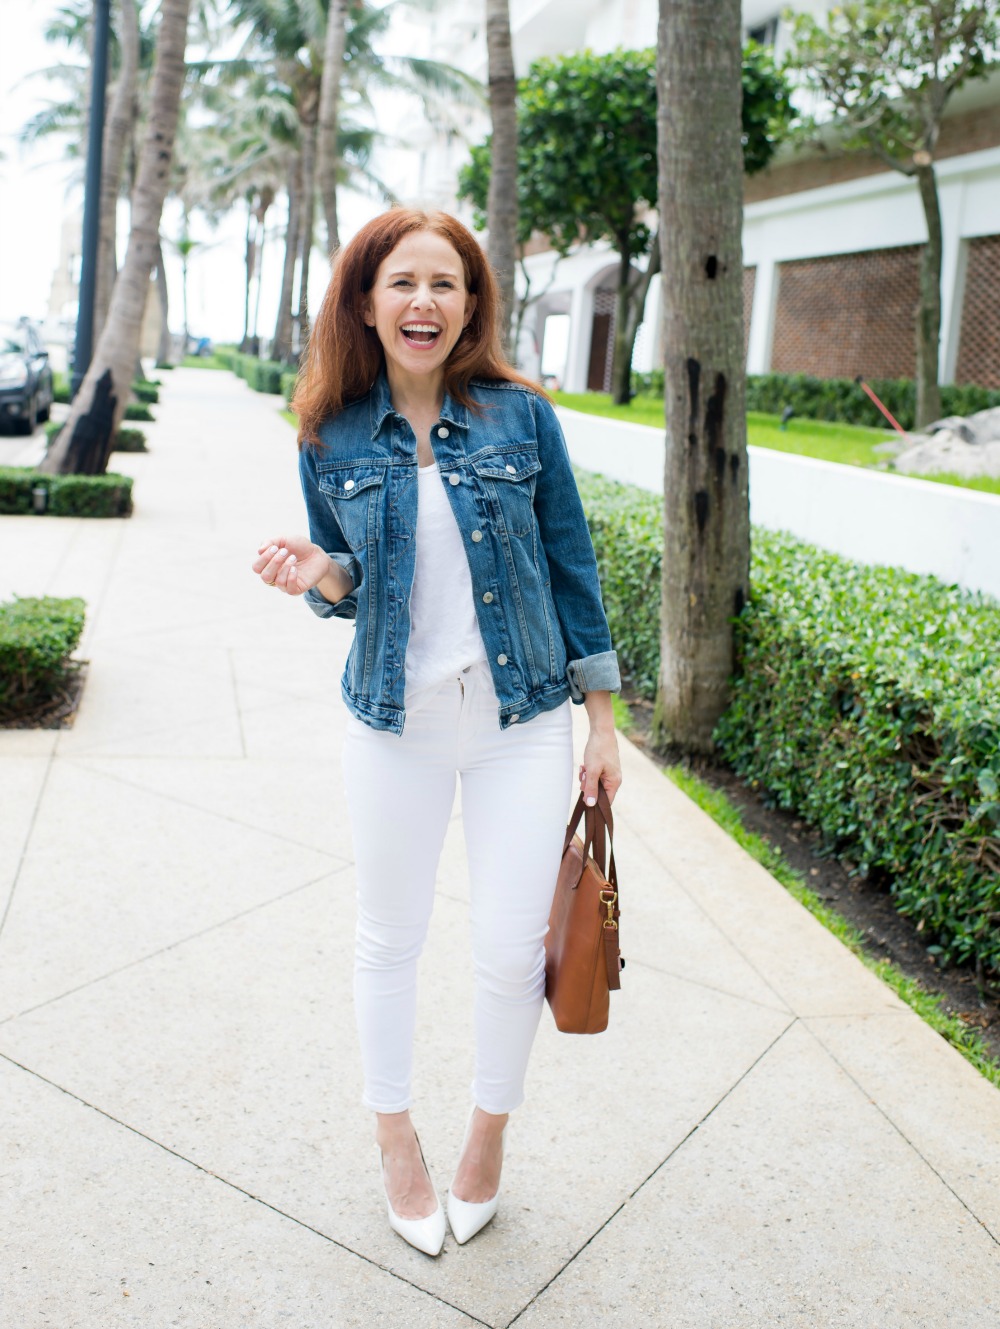 Five Easy, Cute Outfit Ideas for a White tee and white jeans #summeroutfit #whitetee #whitedenim | How to Wear White Jeans & White Tee - outfit ideas featured by popular Florida style blogger, The Modern Savvy